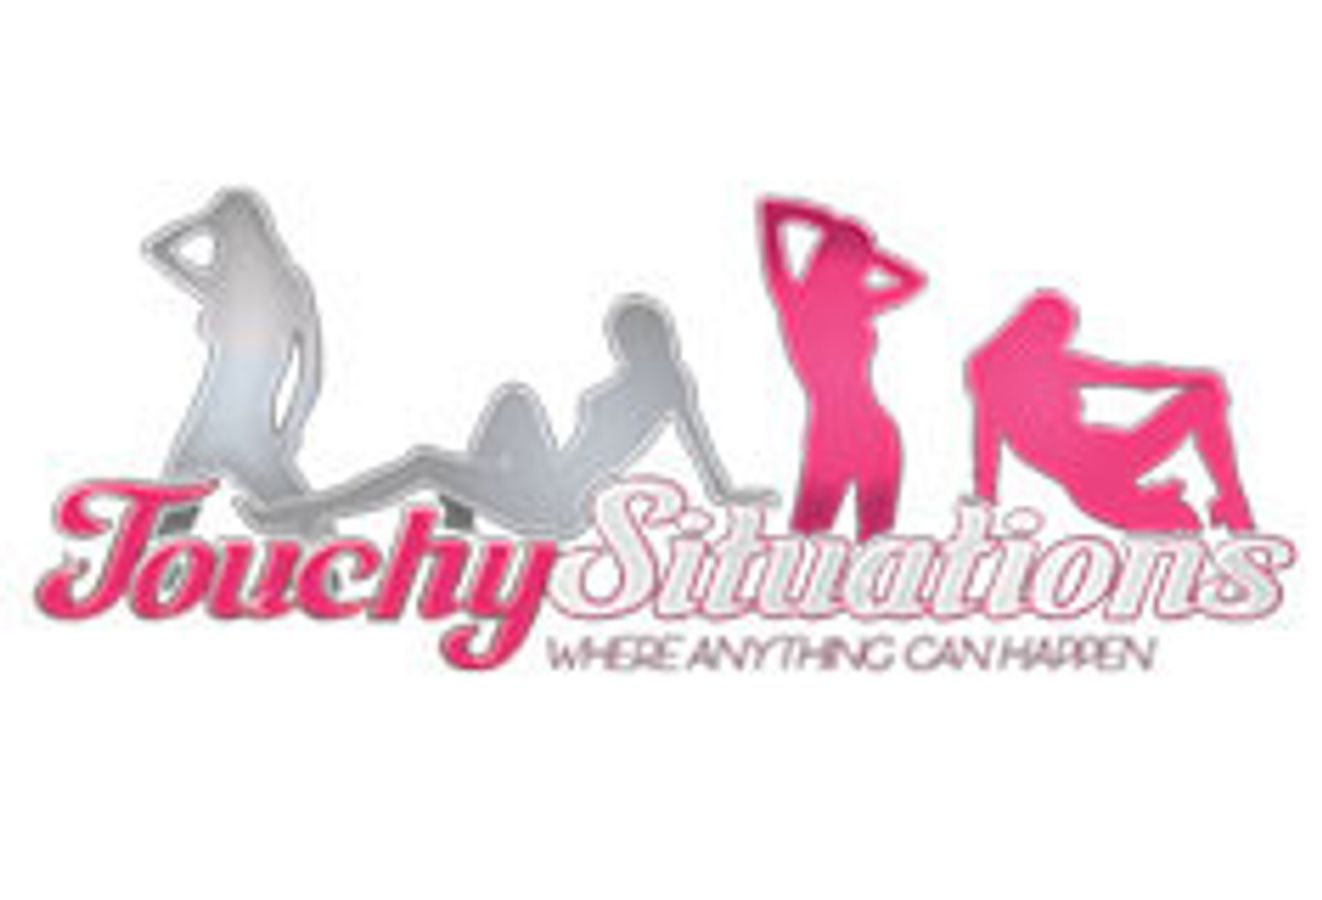 Touchy Situations LLC